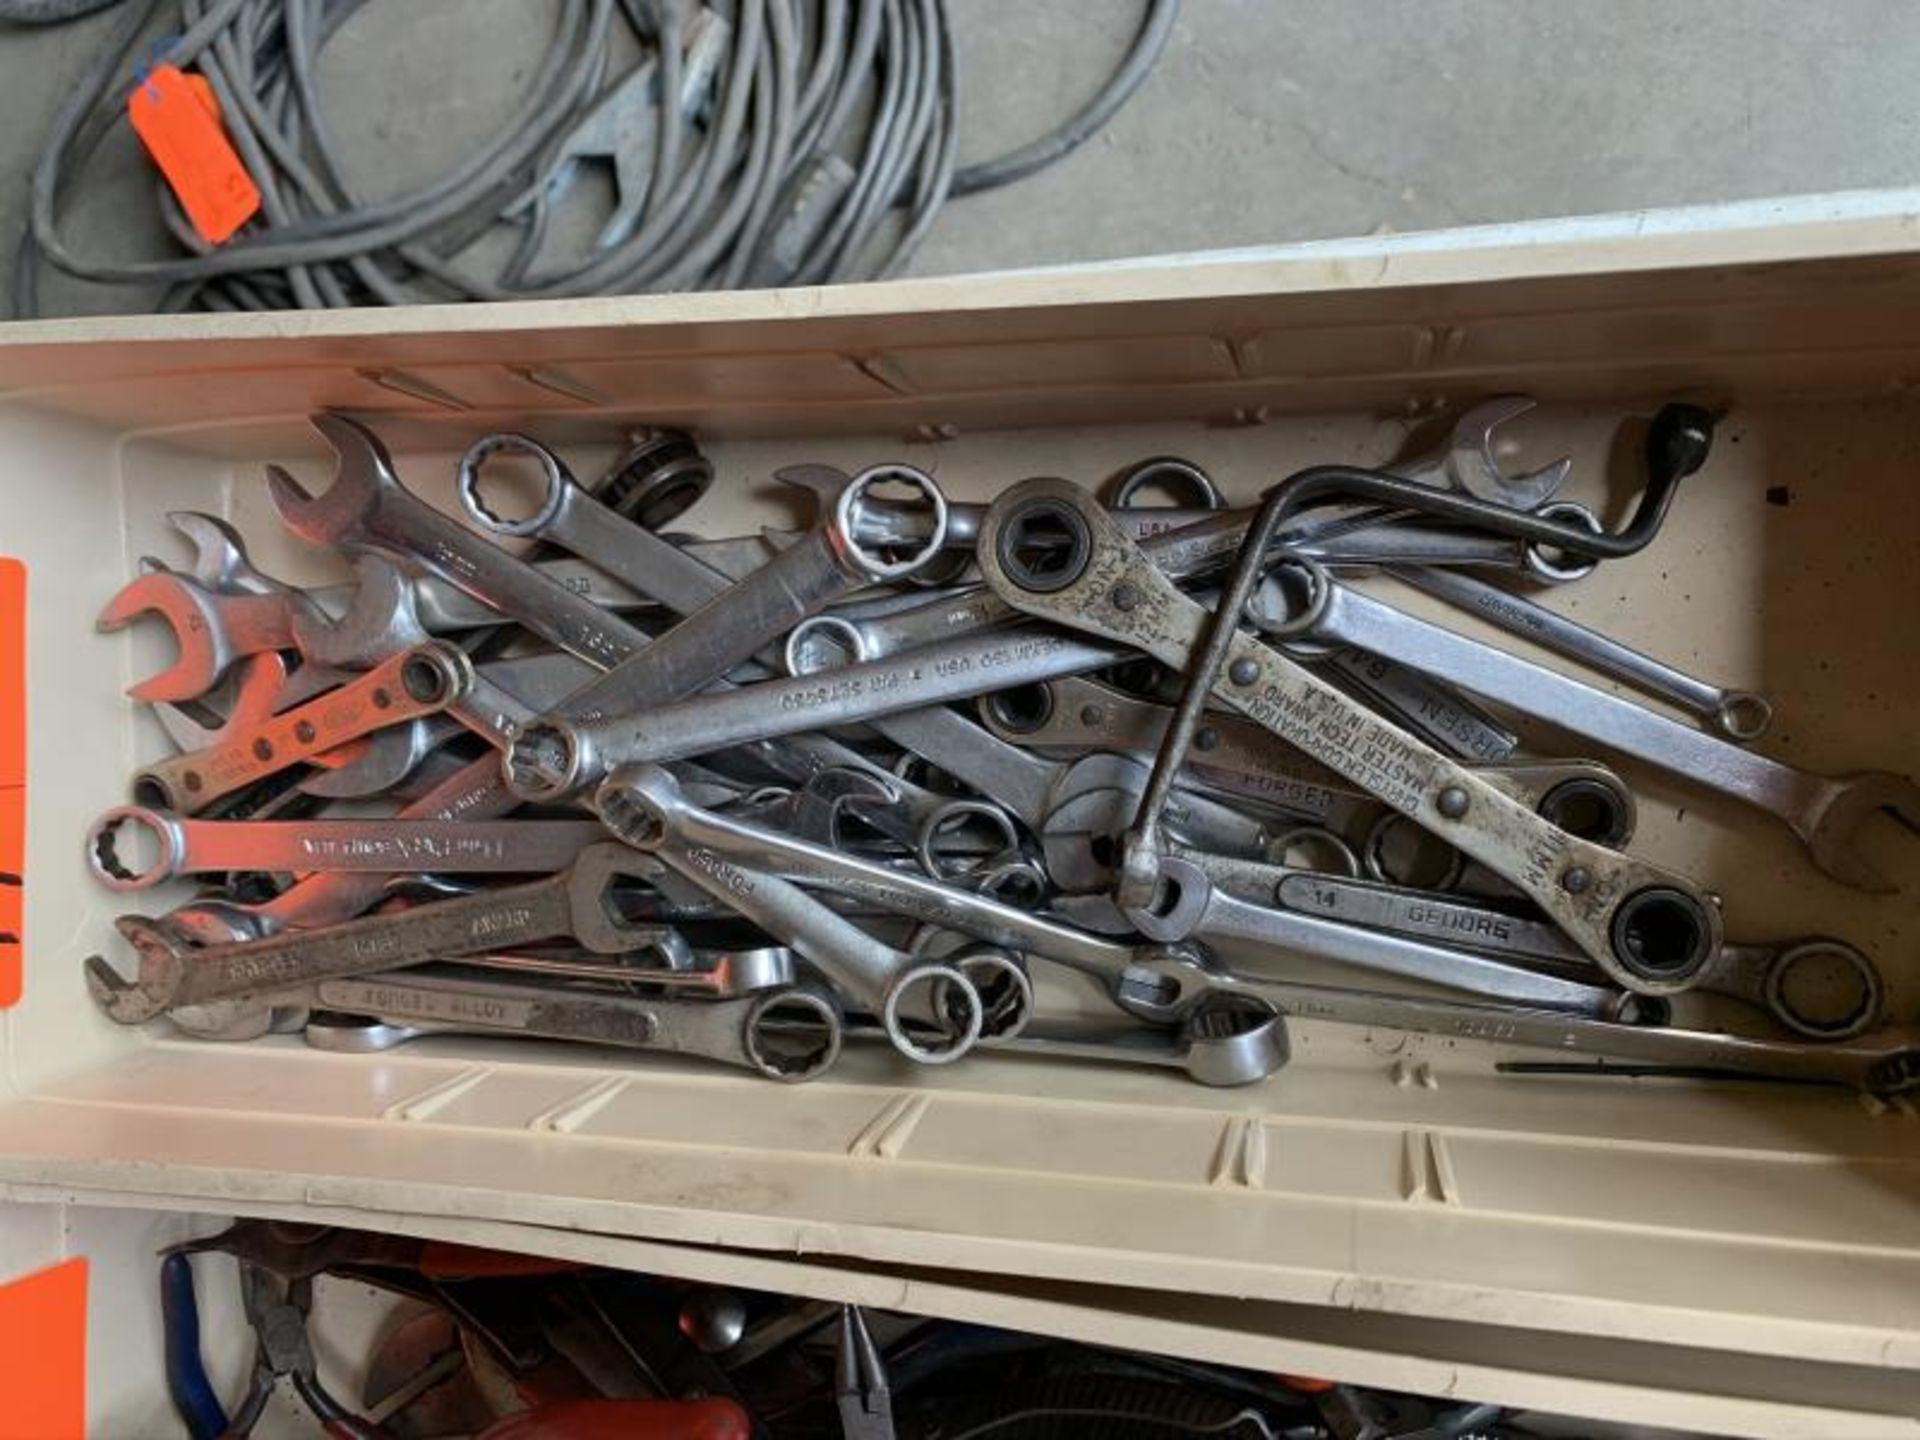 Lot of small wrenches